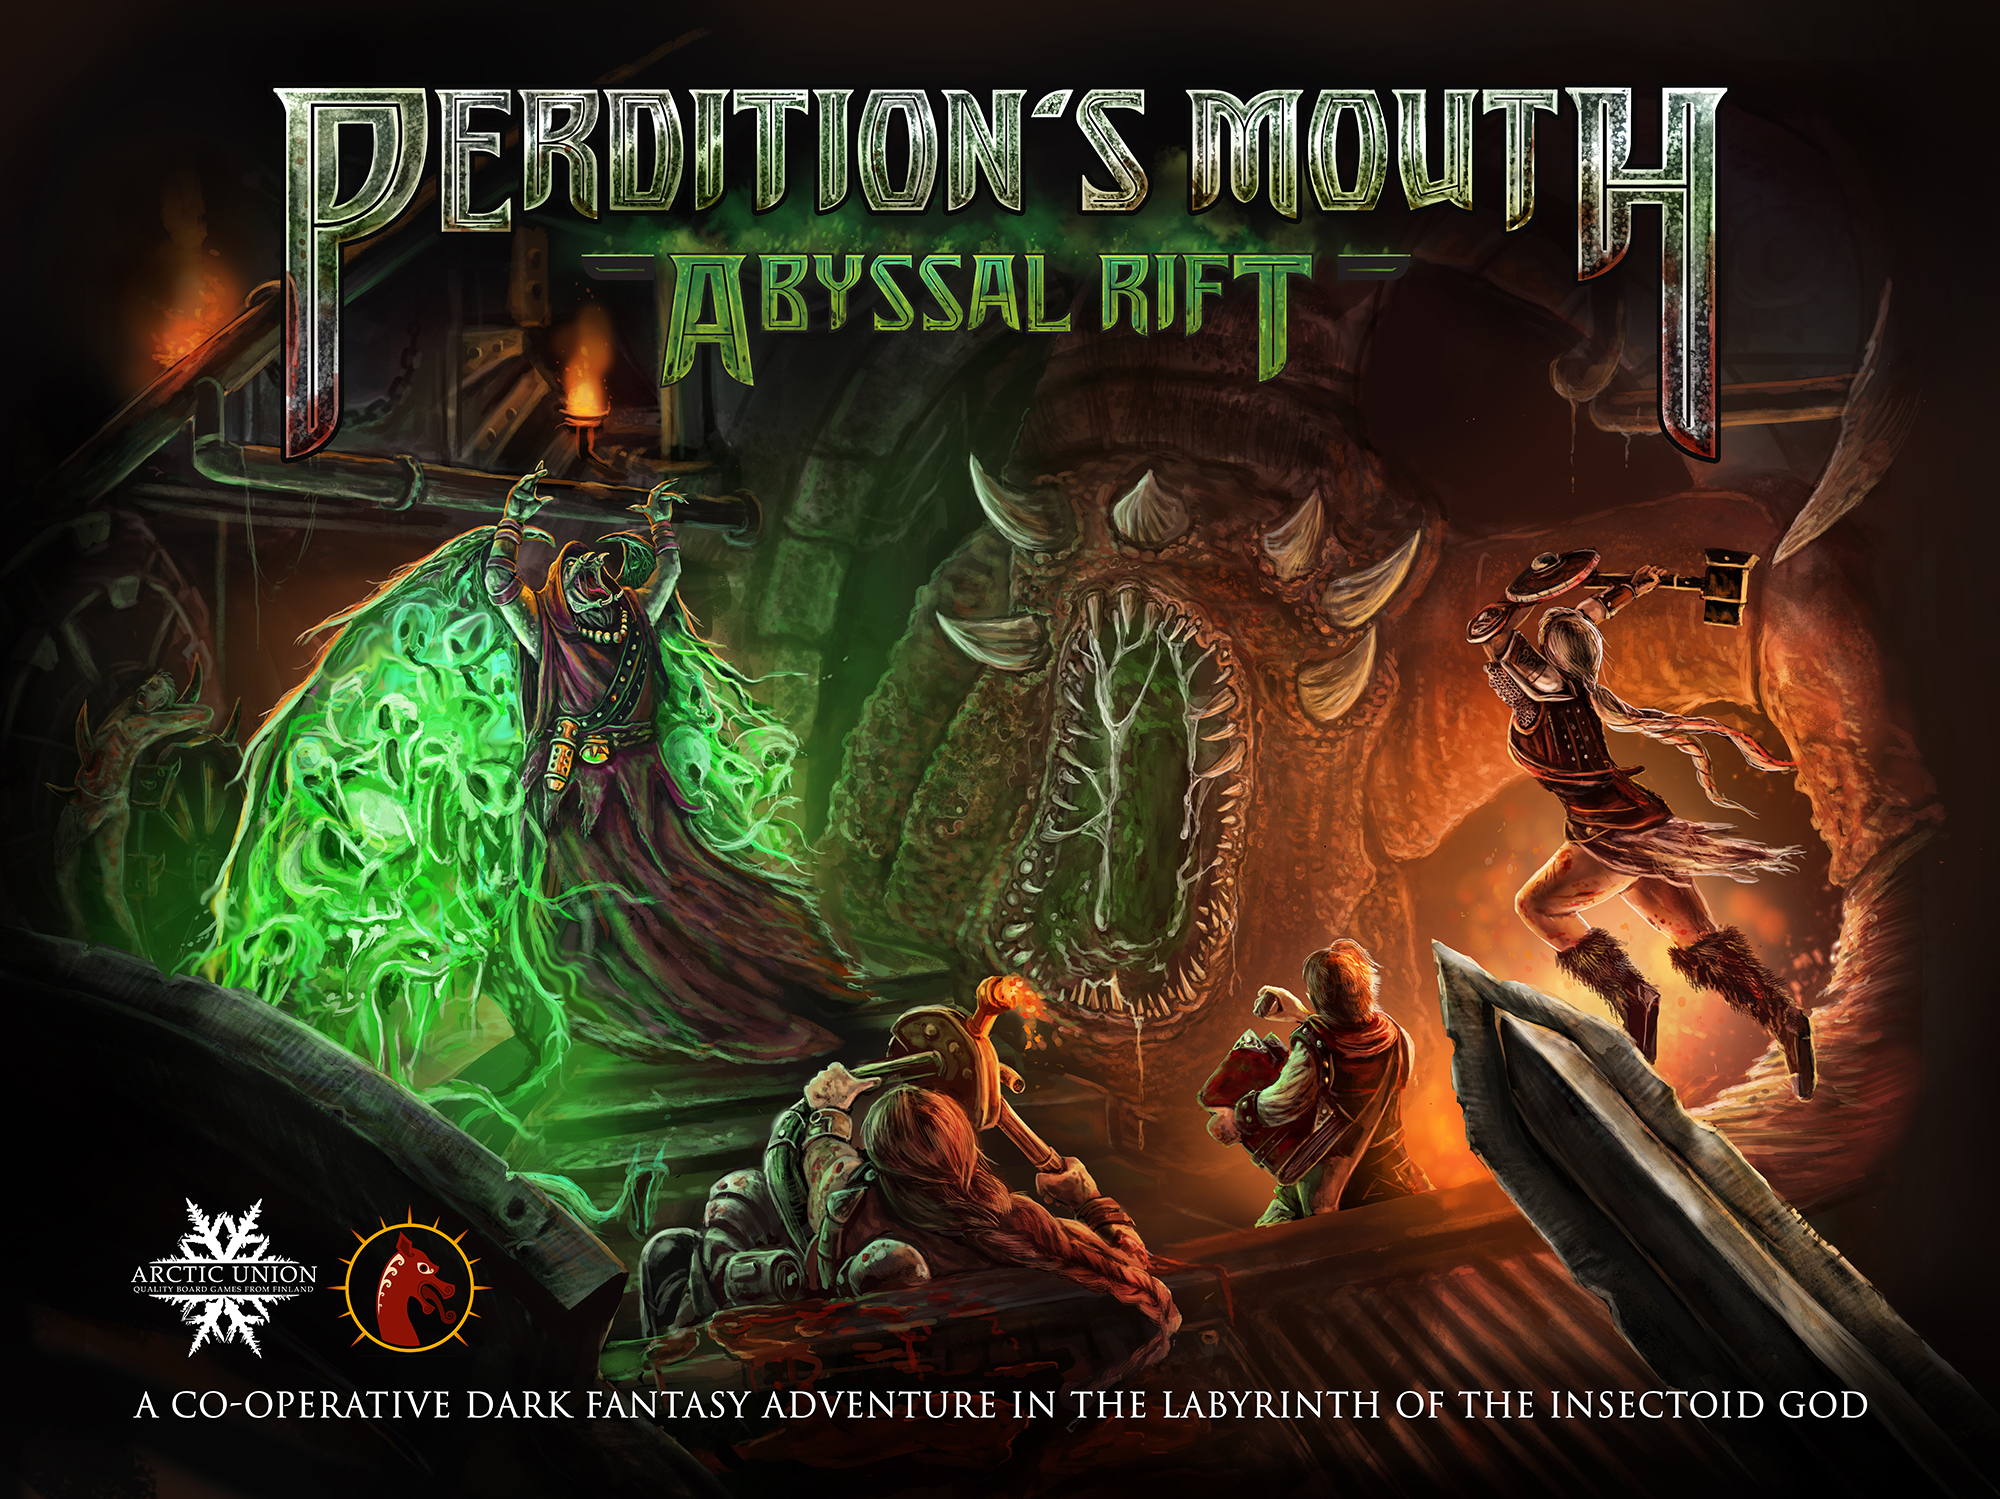 board game box cover for dungeon crawler. Artwork by The Noble Artist. Game is Perdition's Mouth